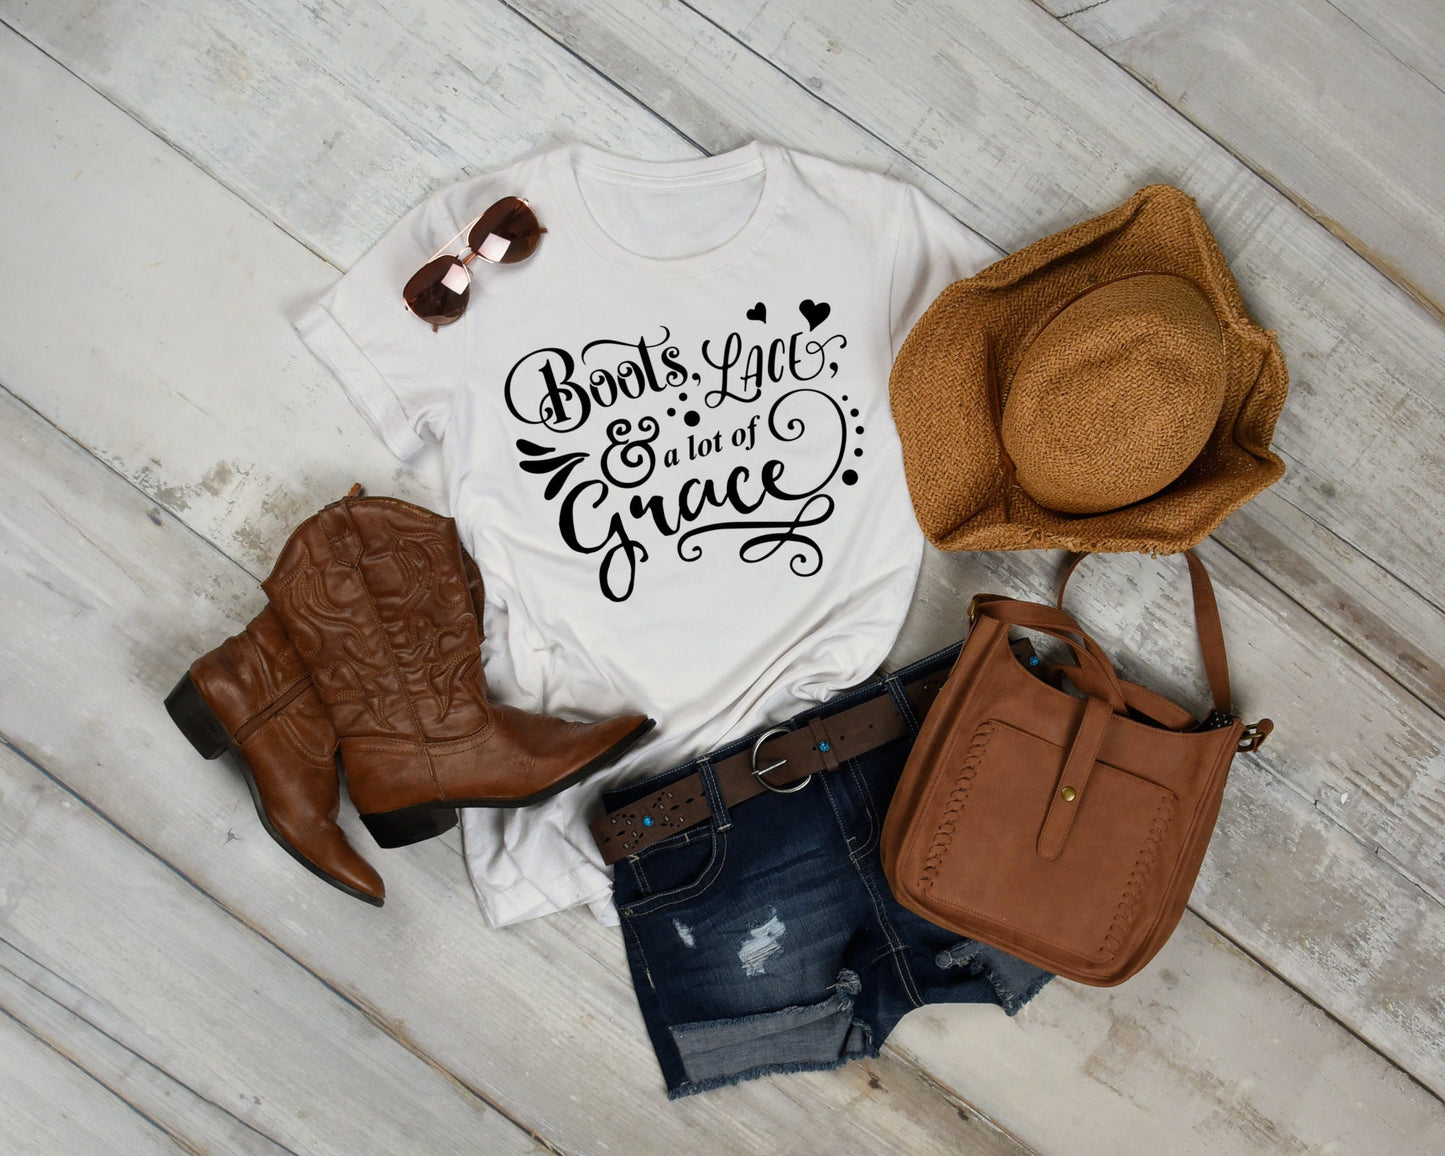 Boots Lace And A Lot of Grace Shirt, Country Music Shirt, Country Women Shirt, Country Shirt, Cowgirl Shirt, Southern Girl Shirt